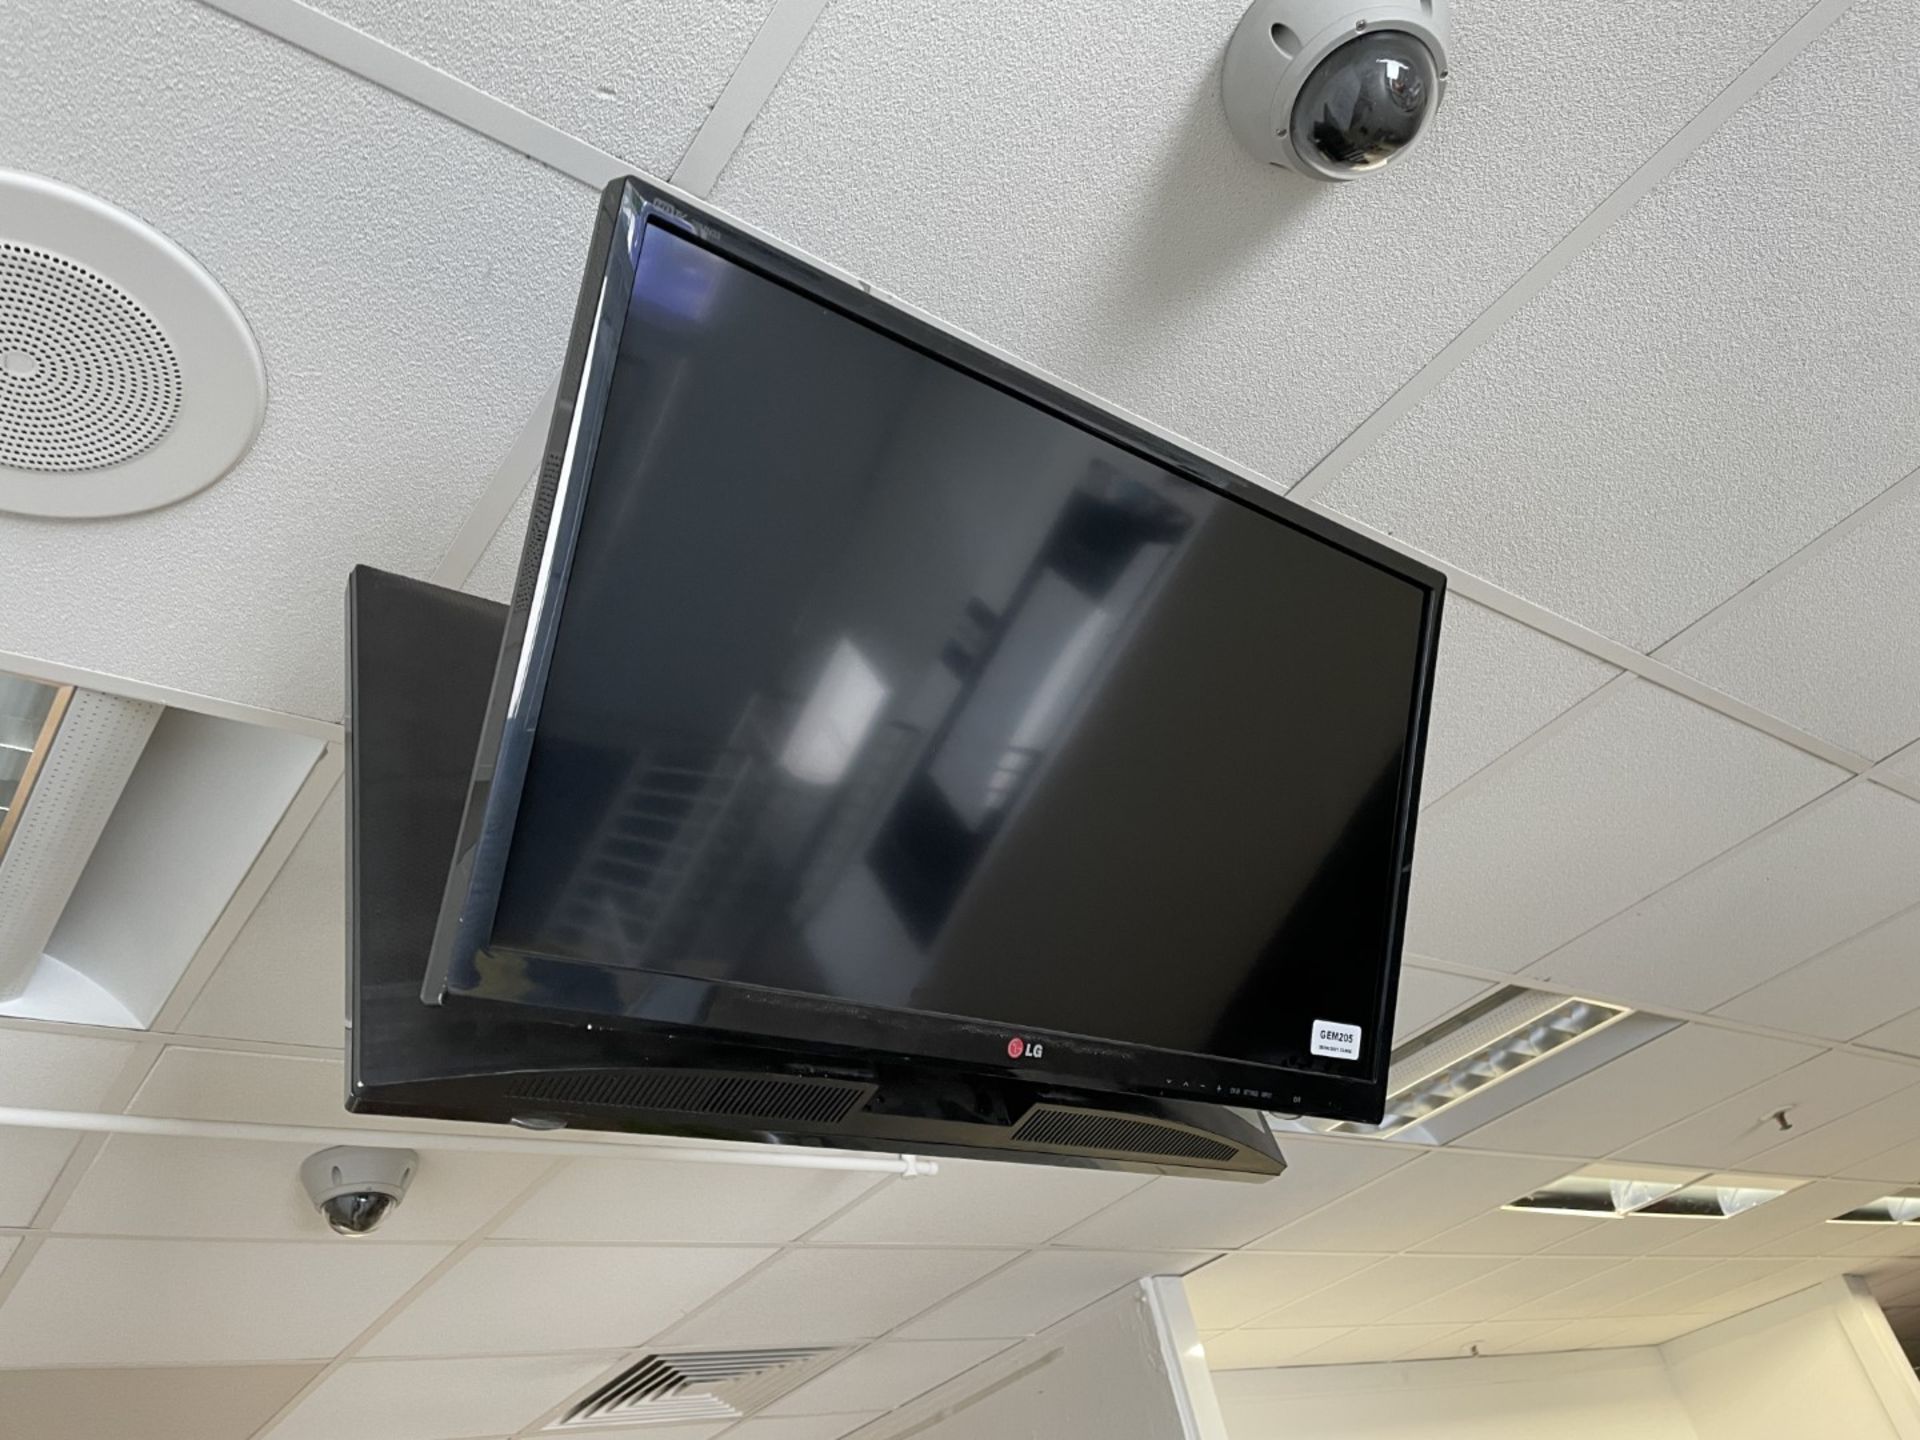 3 x LG 29 Inch LED Monitors With TV Tuners and Ceiling Mounts - CL670 - Ref: GEM205 - Location: